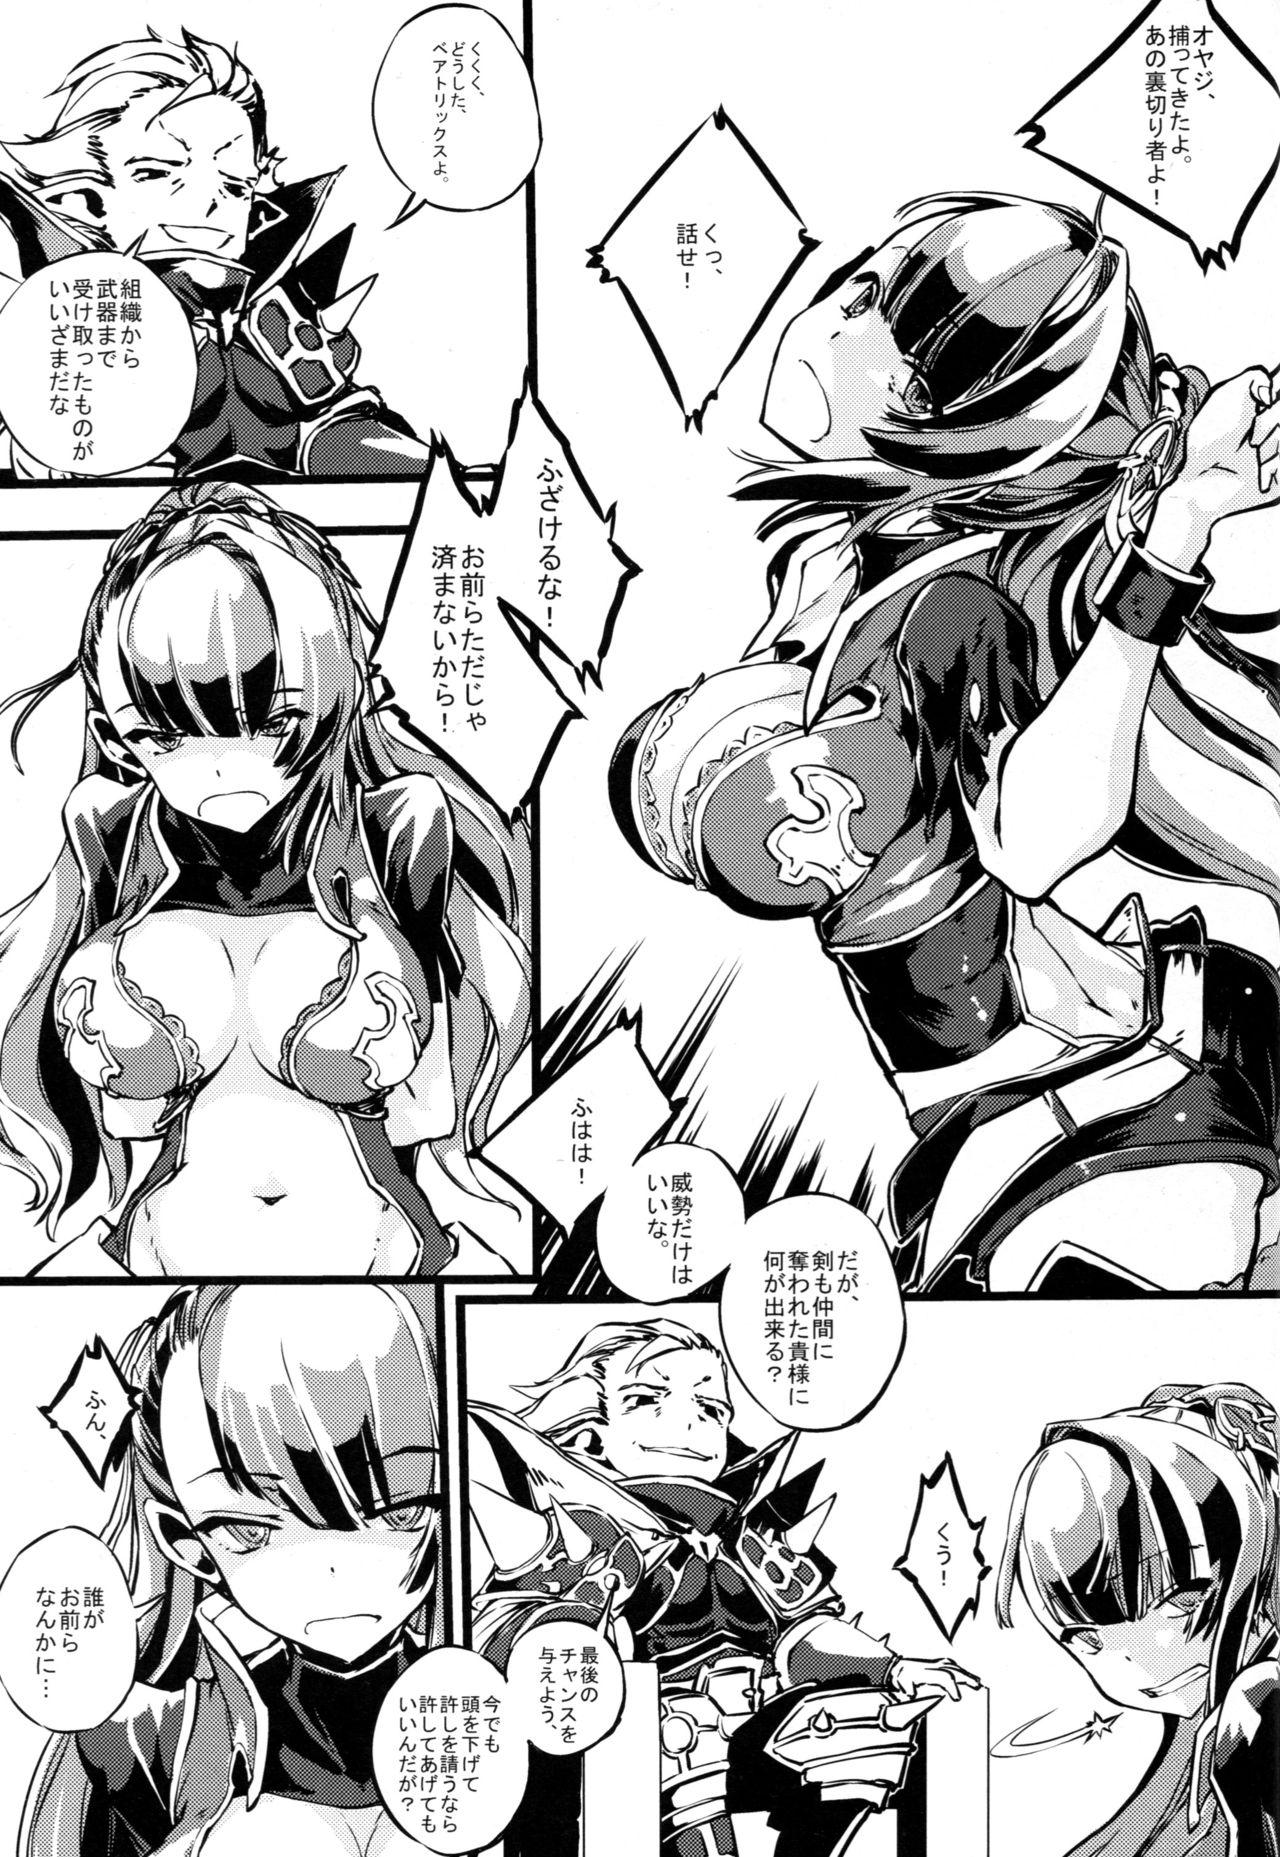 Exhibitionist Bad End Catharsis Vol.3 - Granblue fantasy Naughty - Page 2